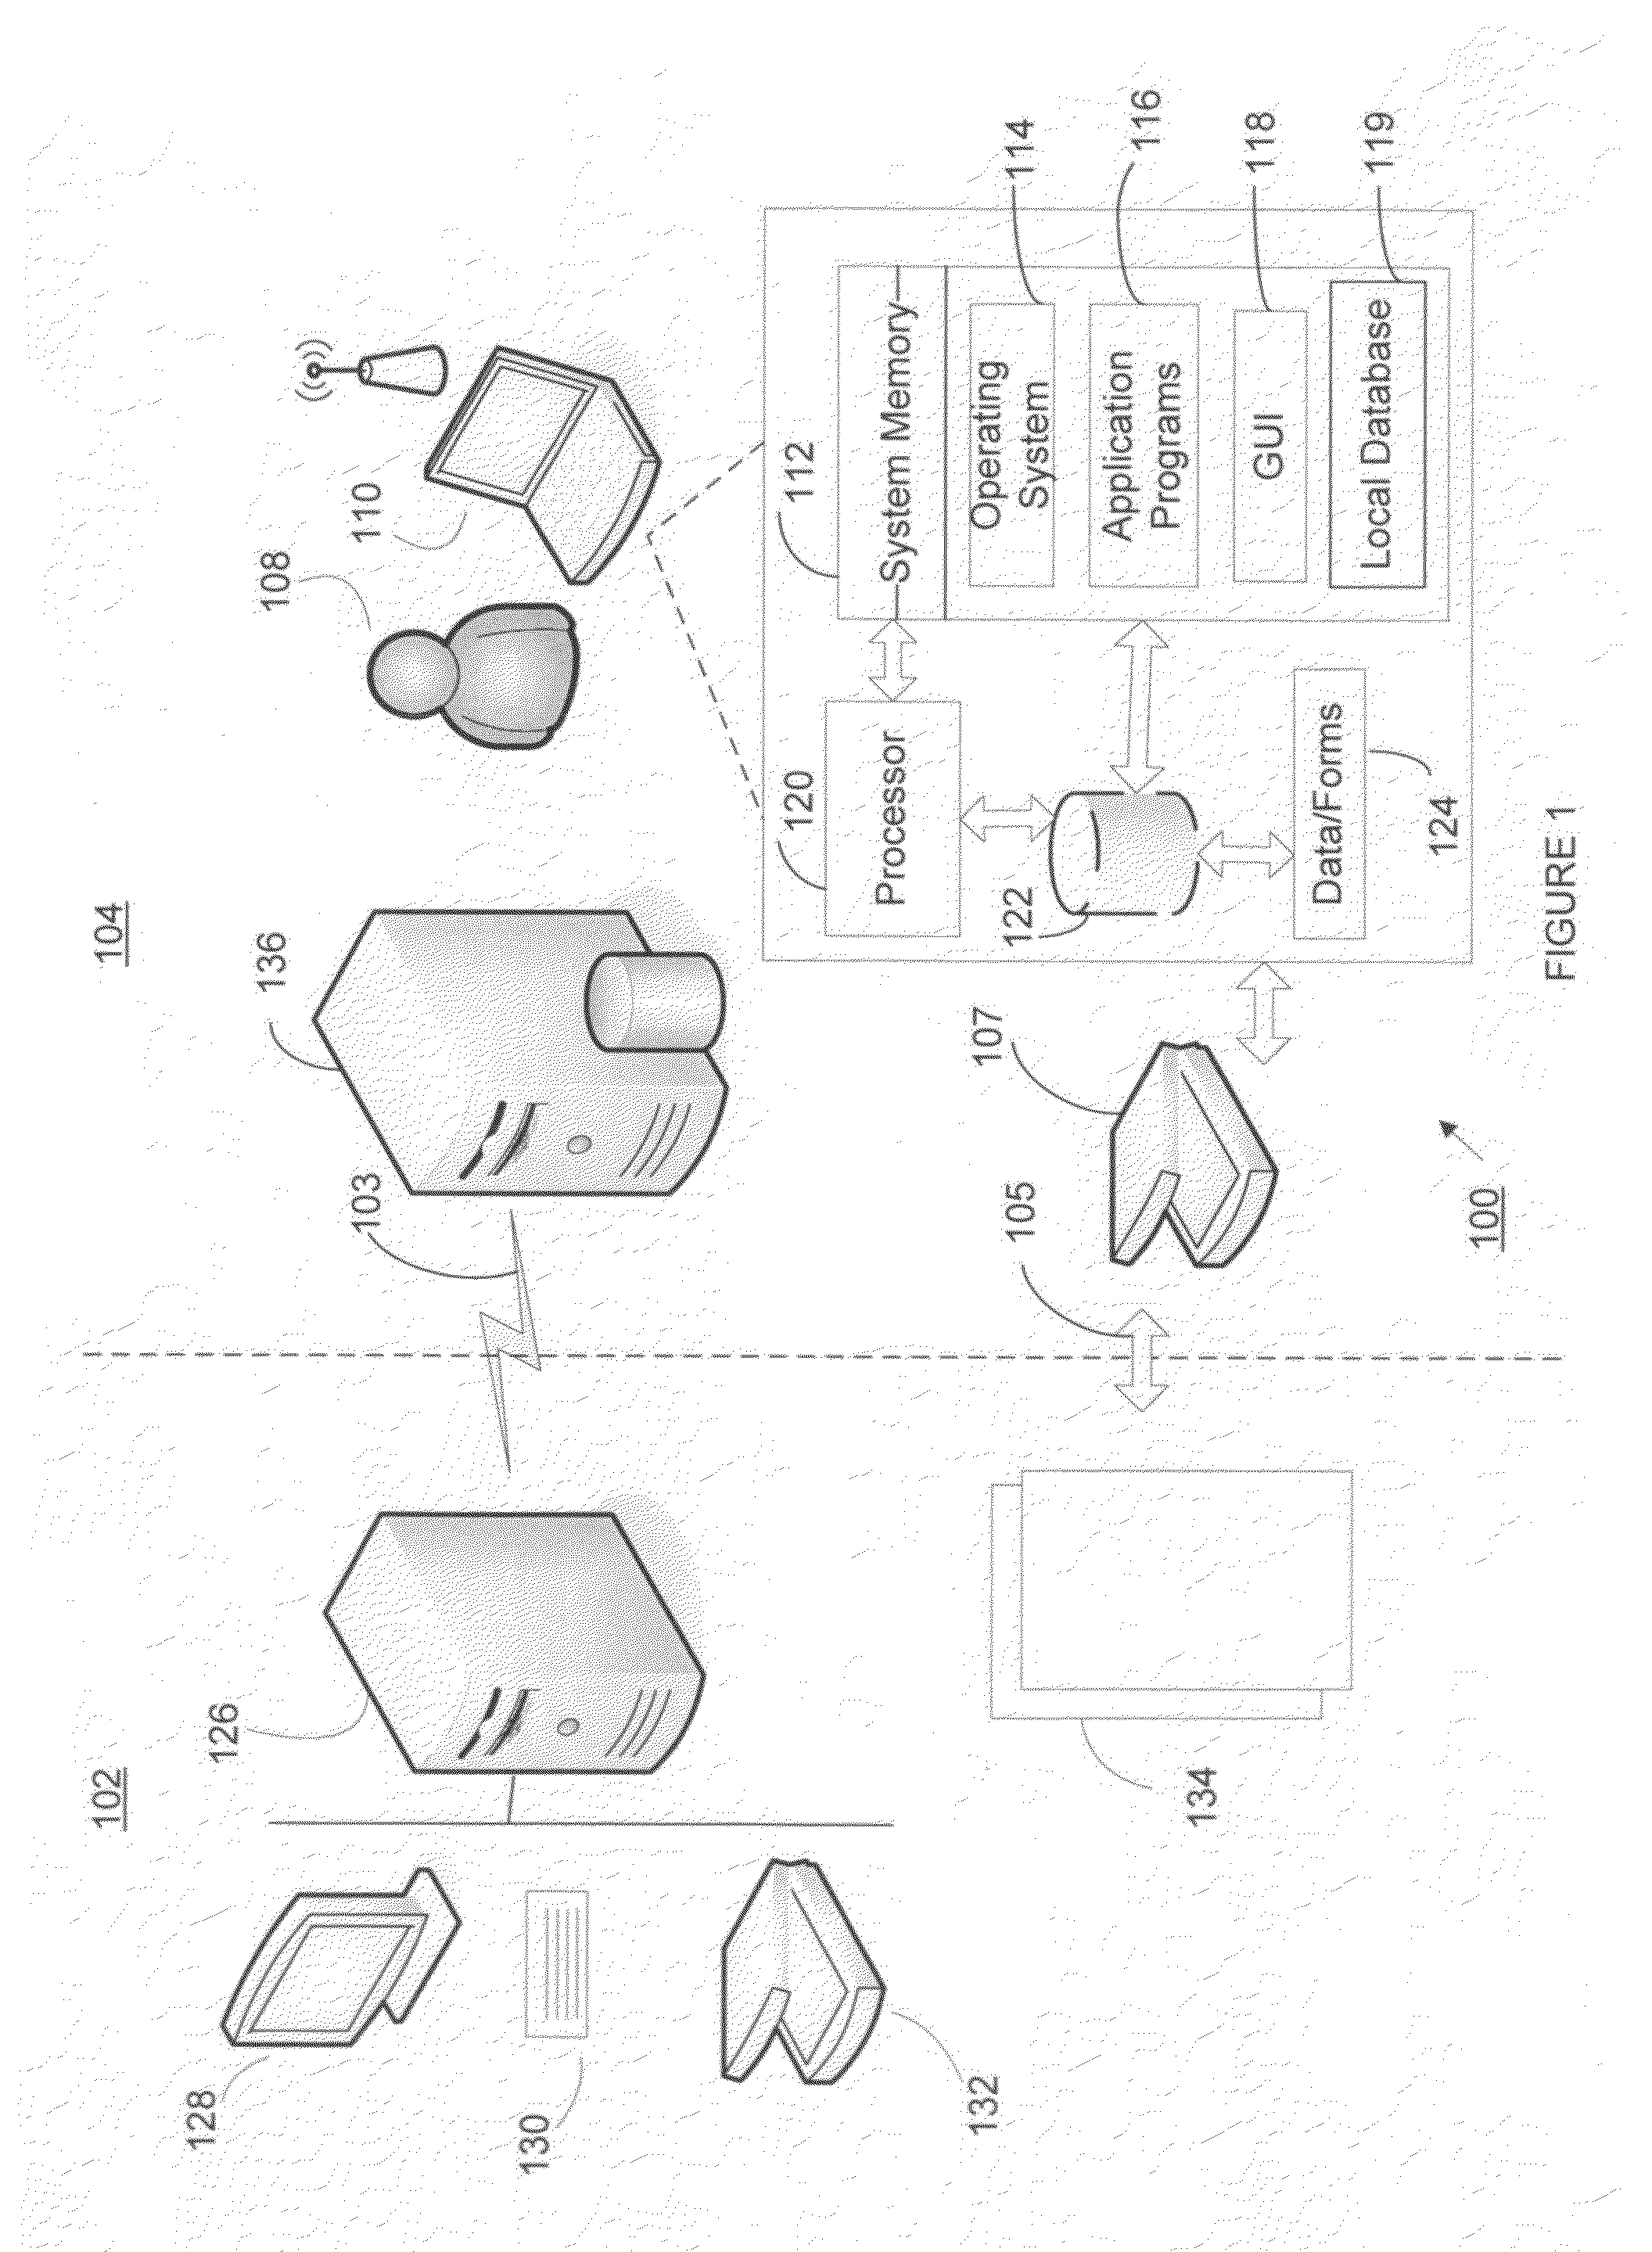 Method and system for source document data entry and form association